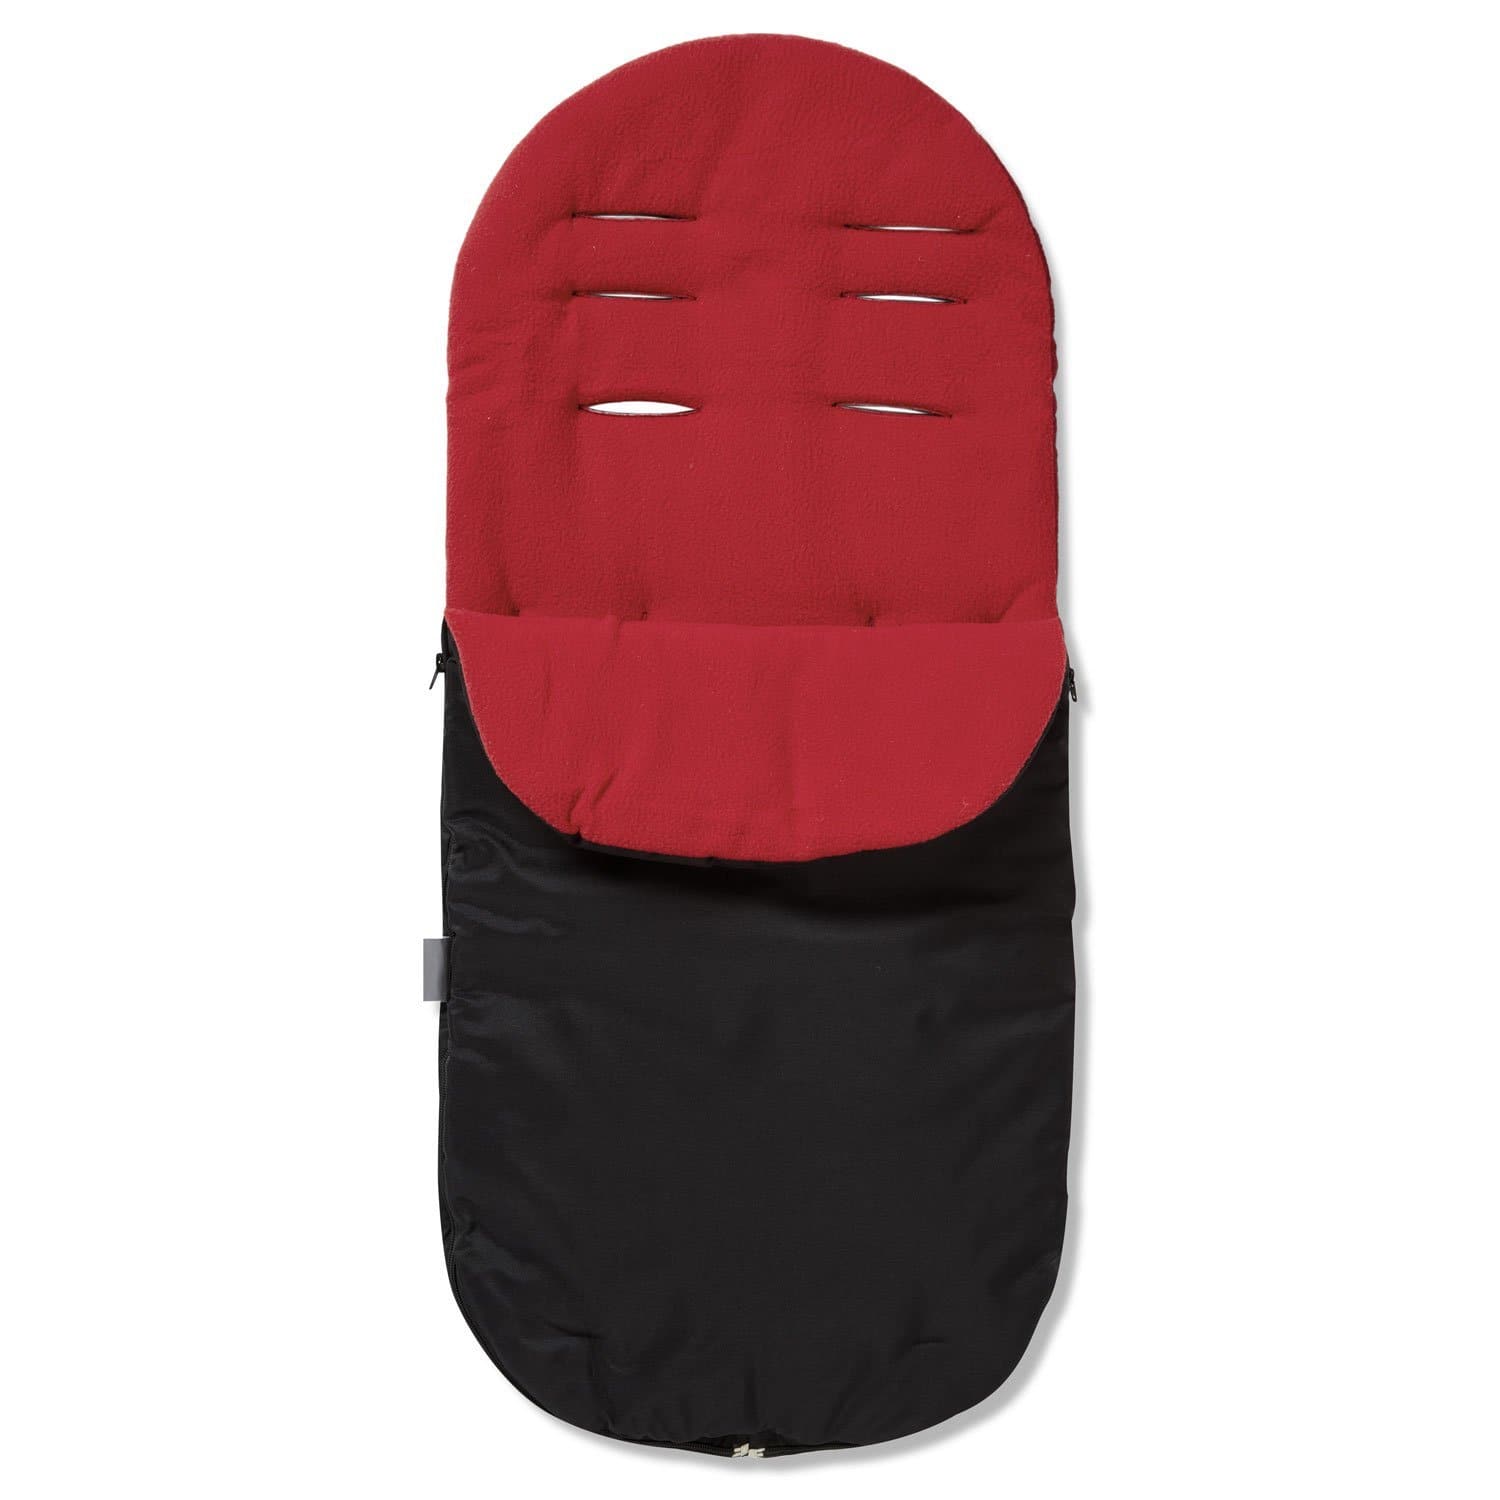 Footmuff / Cosy Toes Compatible with Baby Jogger - Red / Fits All Models | For Your Little One